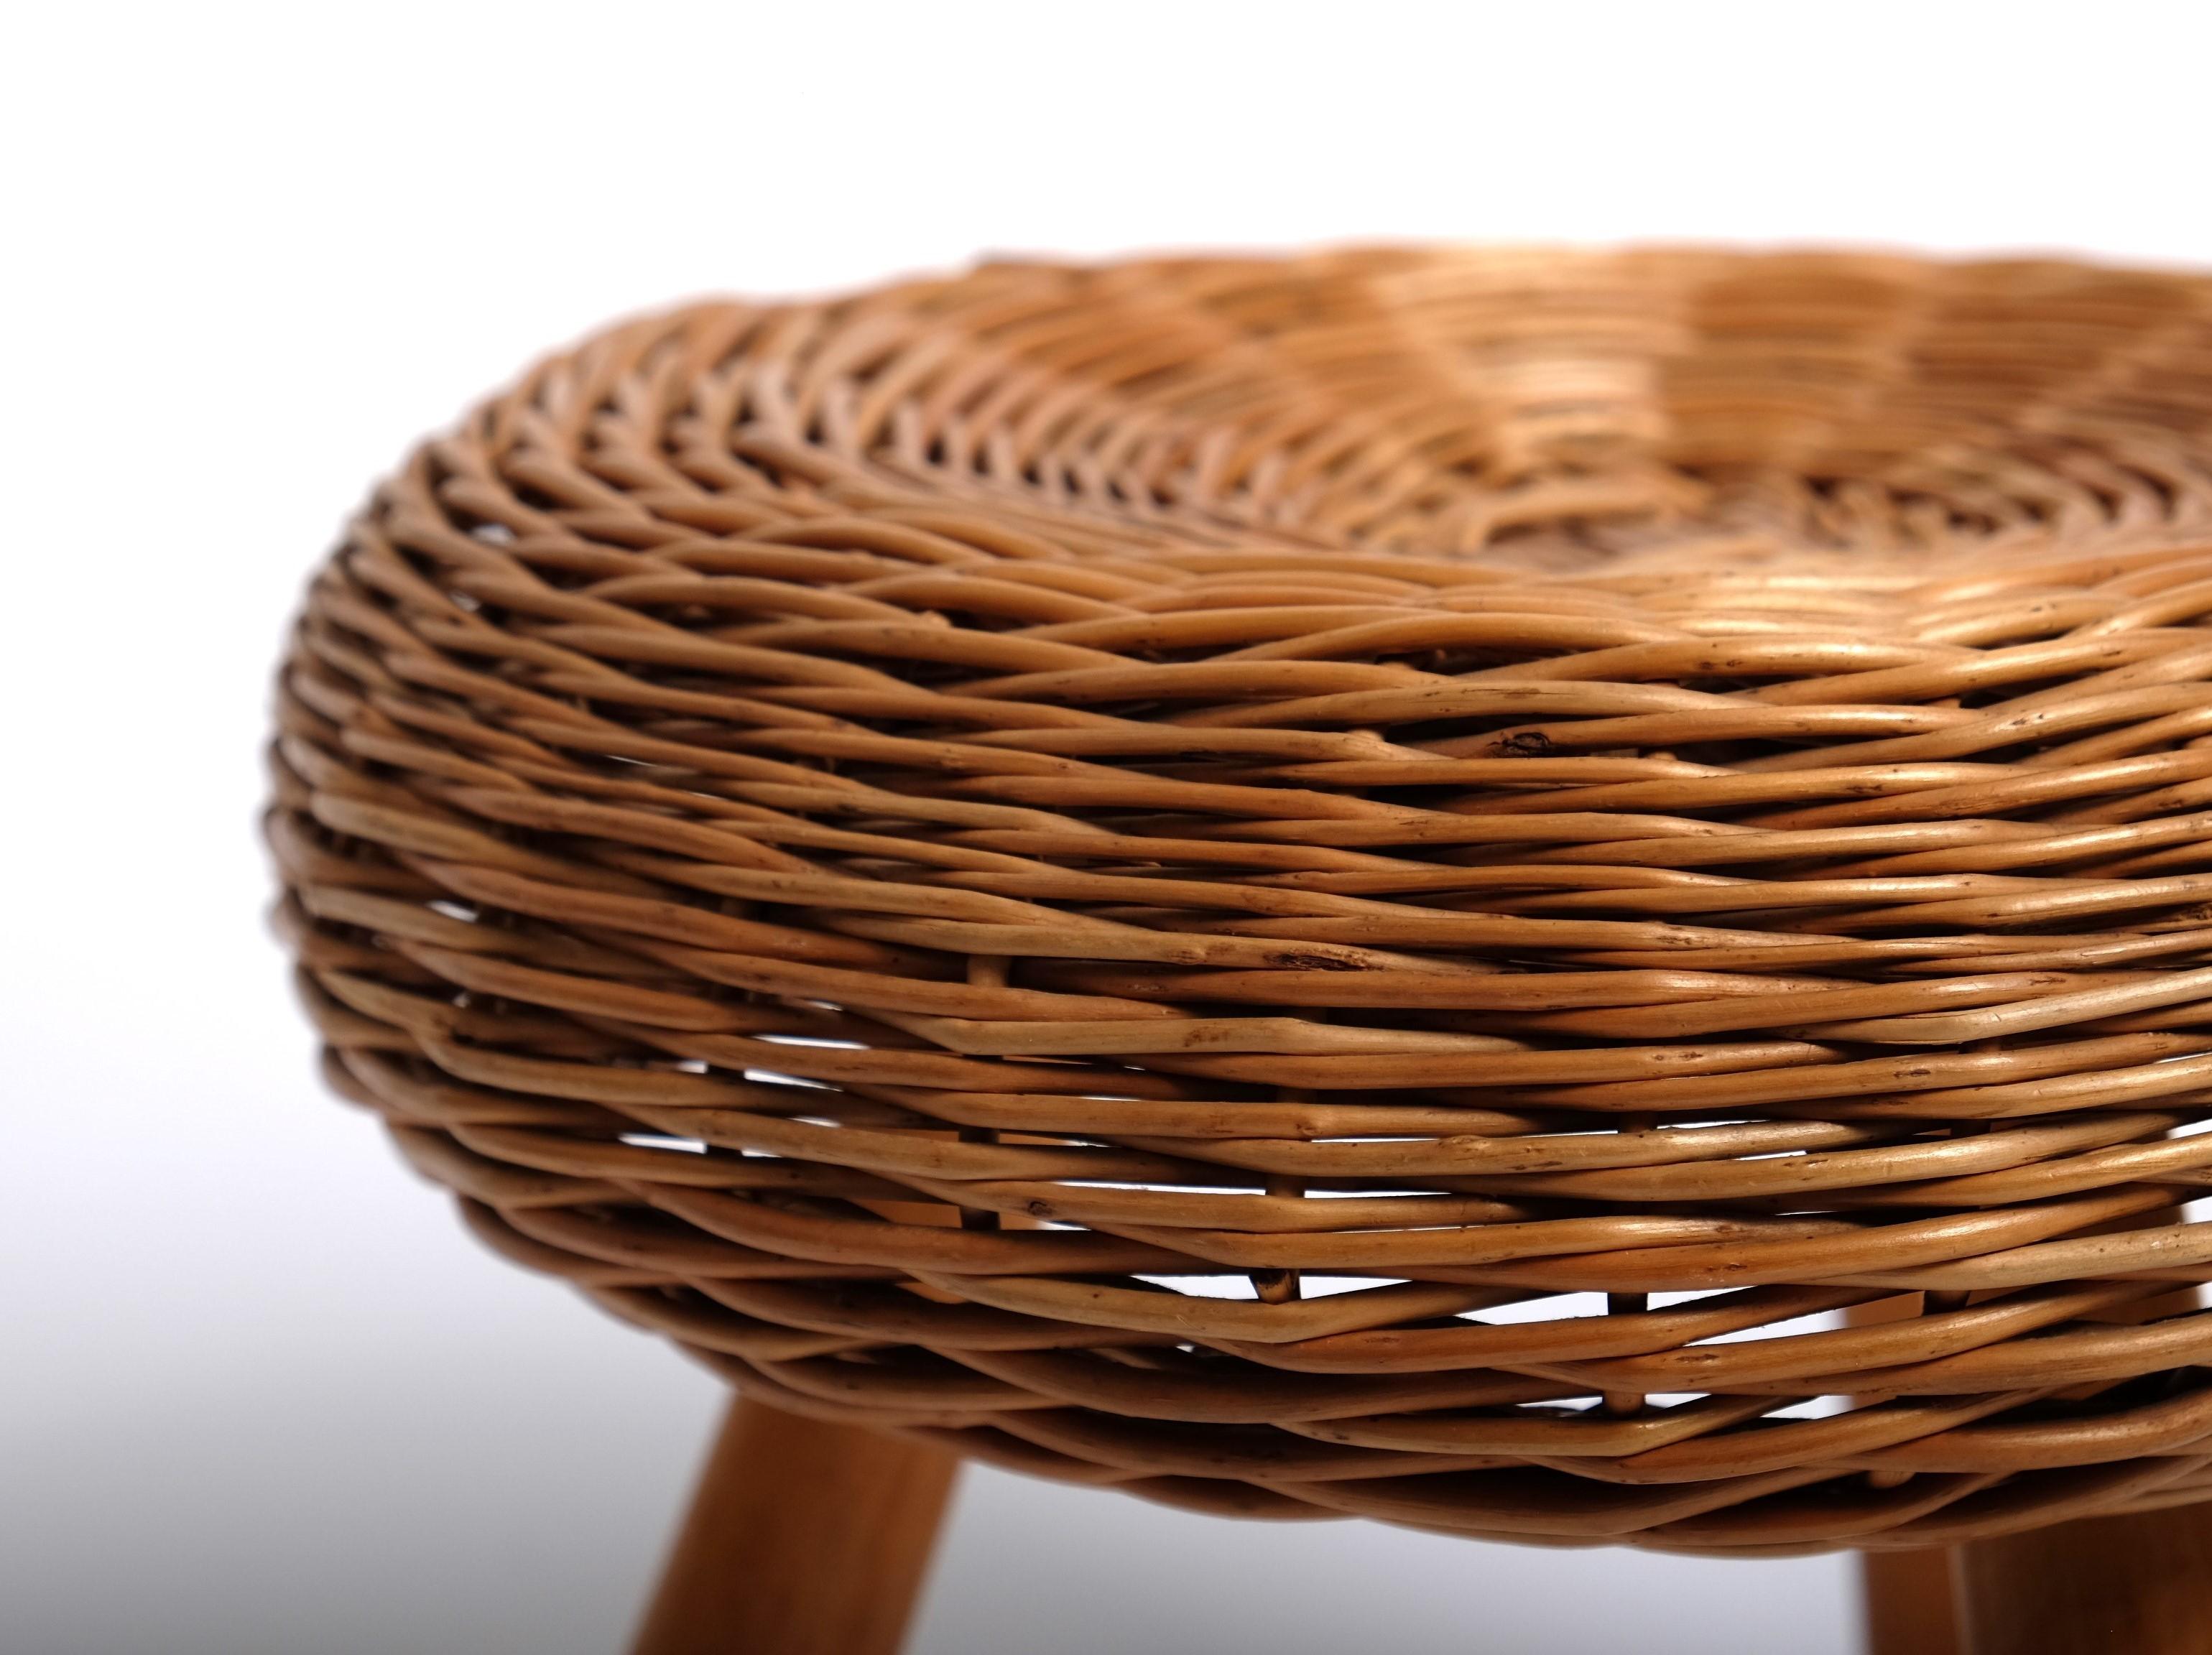 Tony Paul 'Attributed' Stool Wicker Wood, United States 1950s For Sale 6